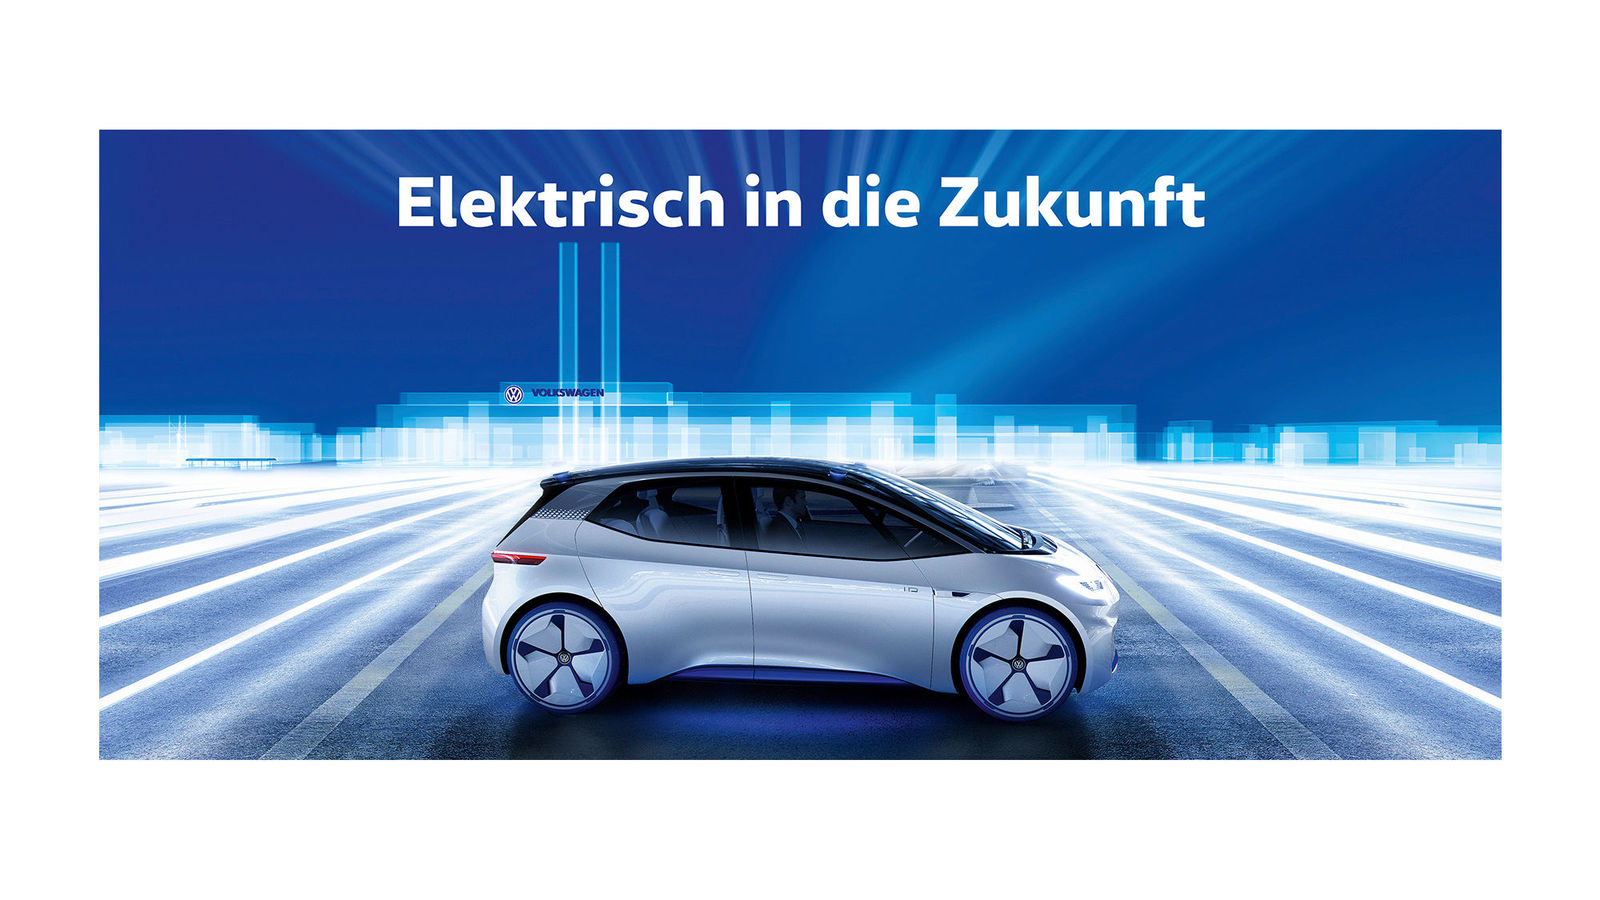 Car city Zwickau: From Horch to e-mobility